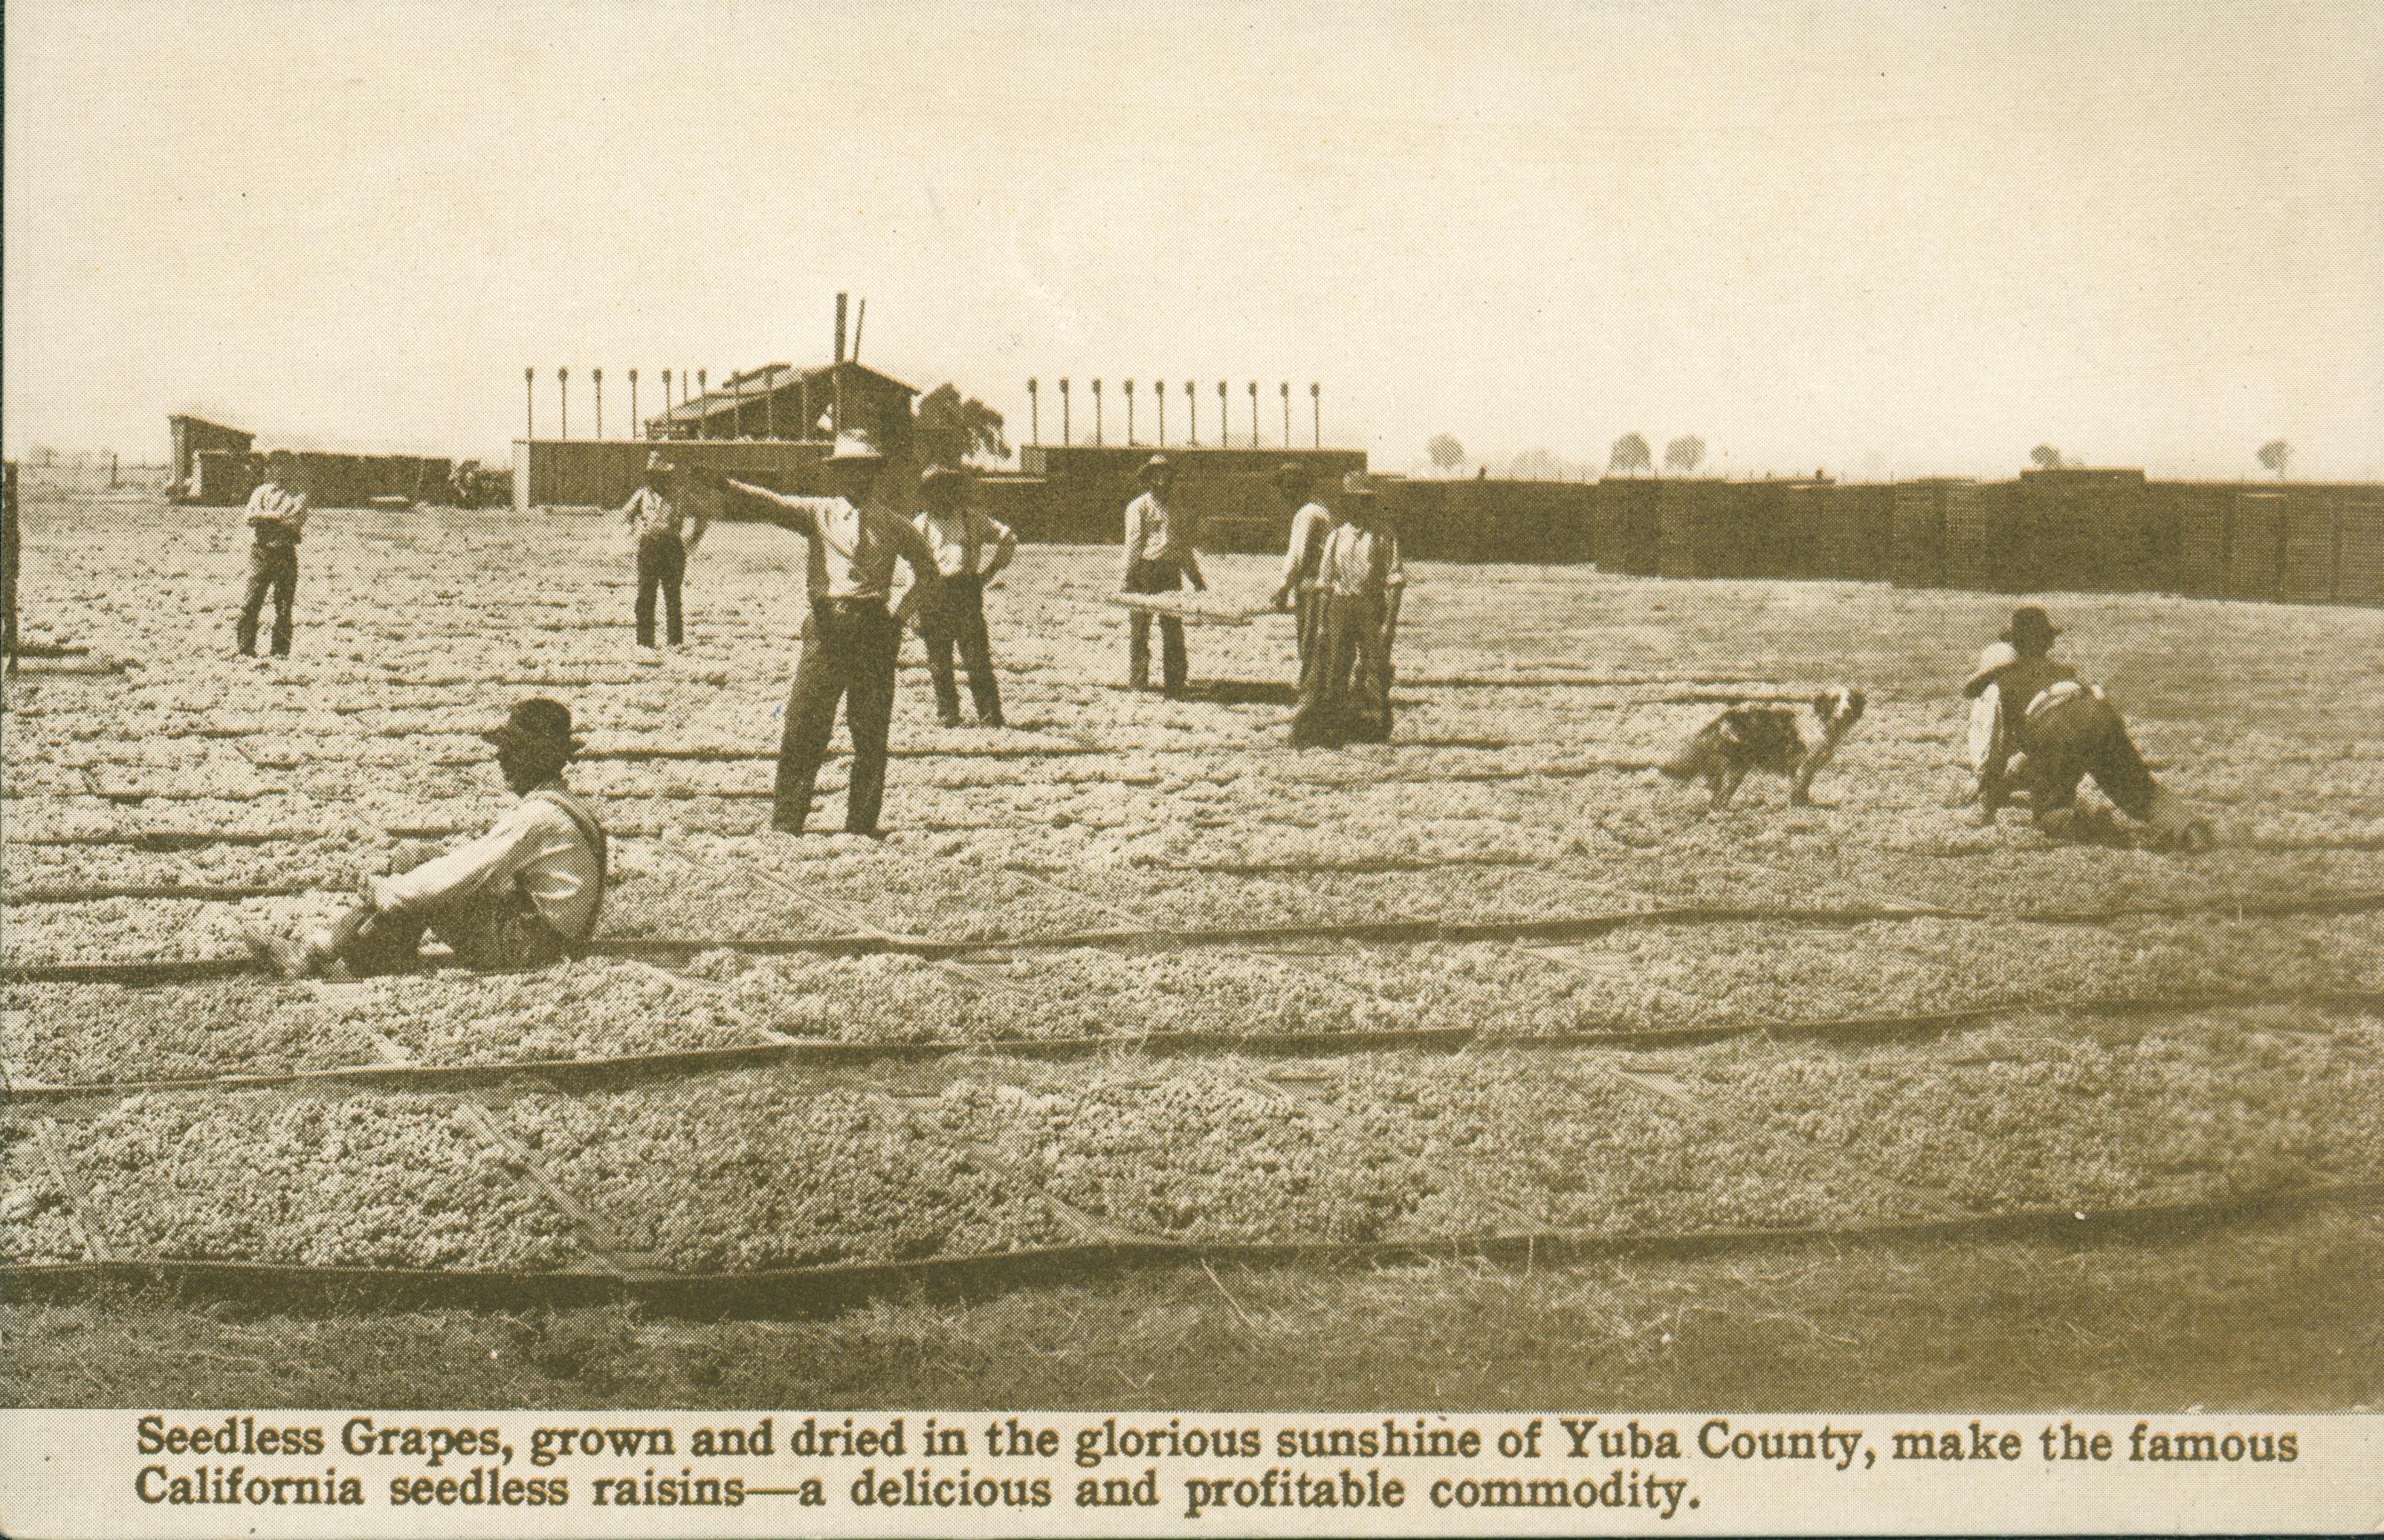 Shows a field covered in drying grapes with several workers either sorting or laying them out